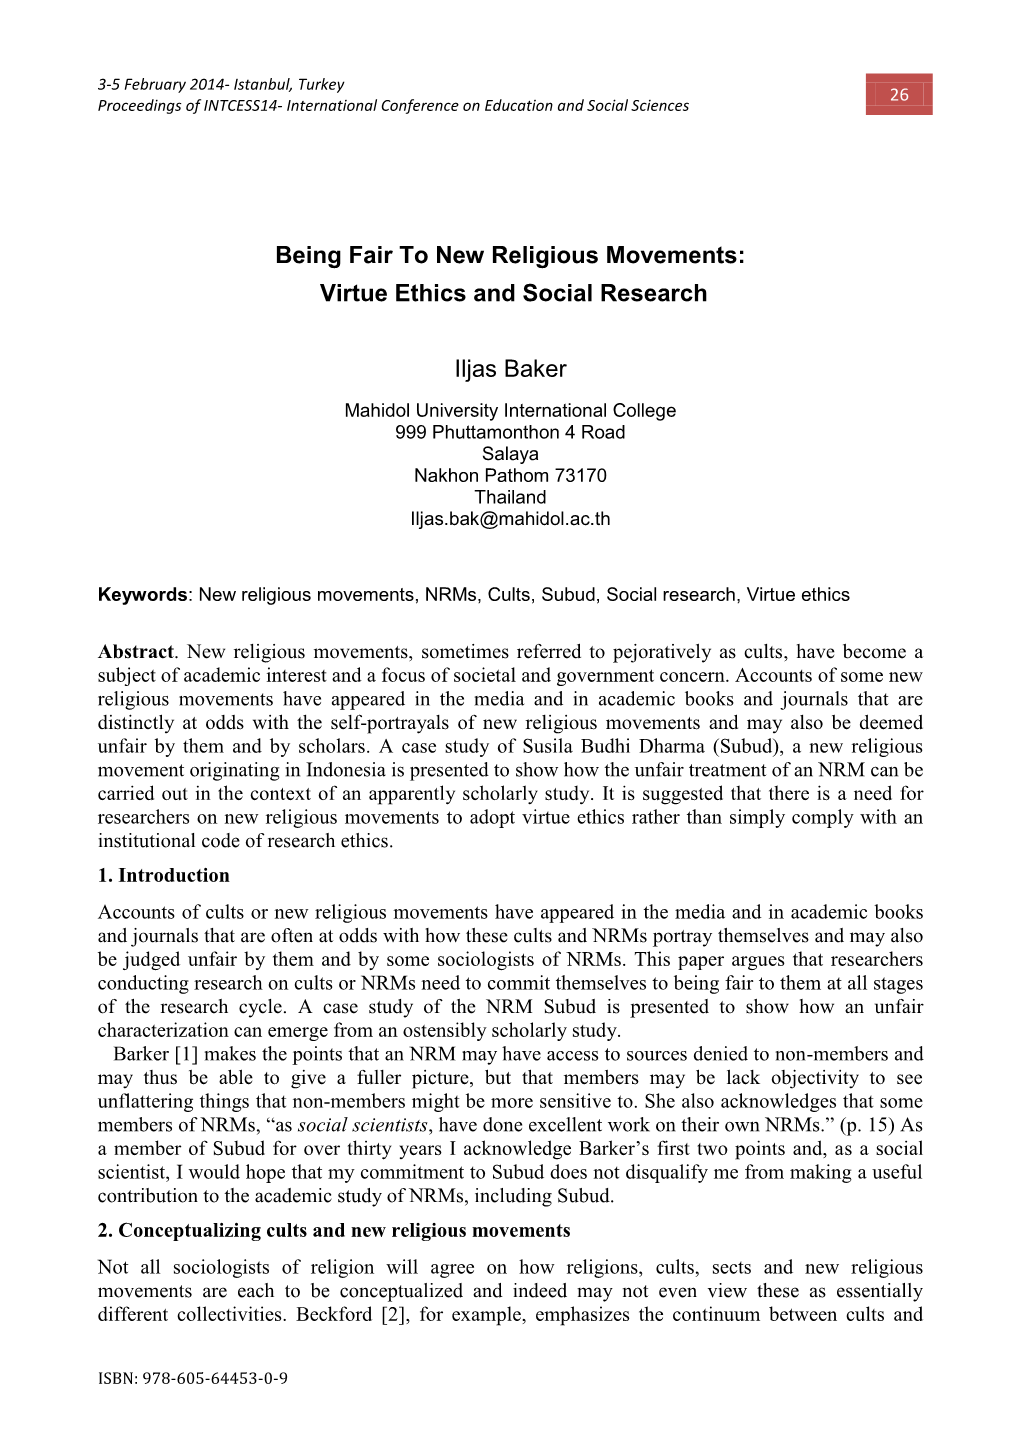 Being Fair to New Religious Movements: Virtue Ethics and Social Research